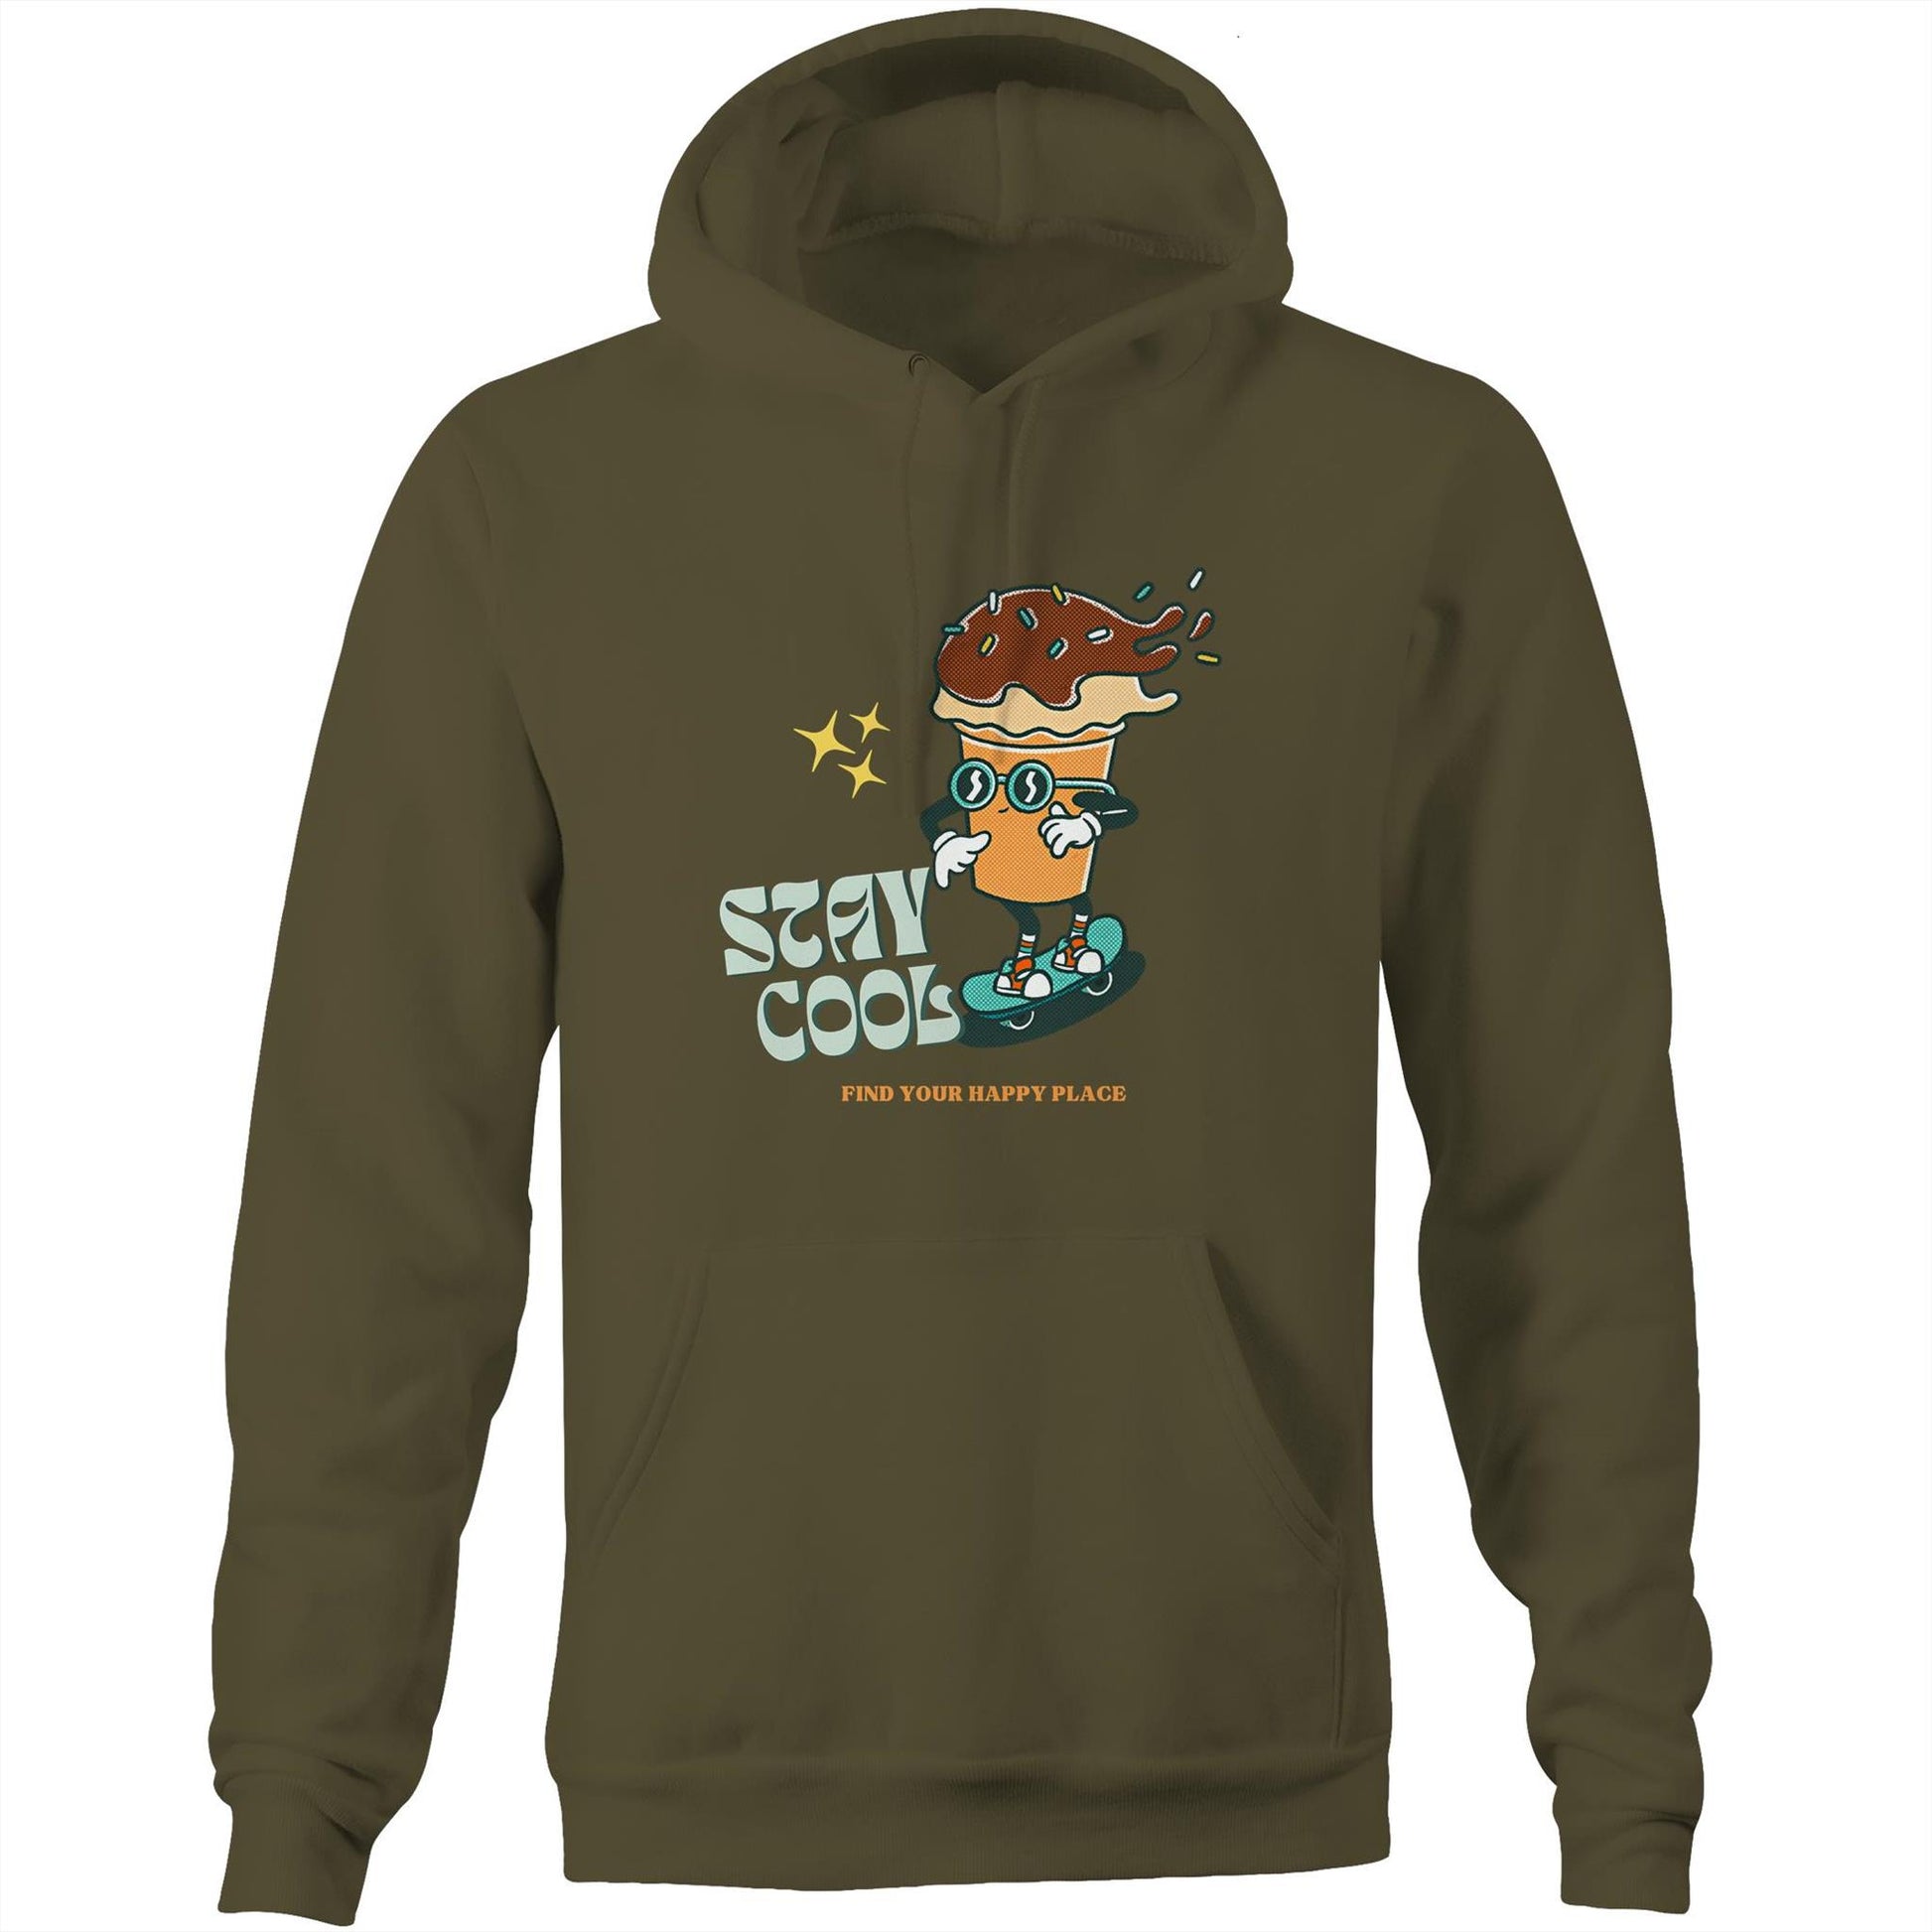 Stay Cool, Find Your Happy Place - Pocket Hoodie Sweatshirt Army Hoodie Retro Summer